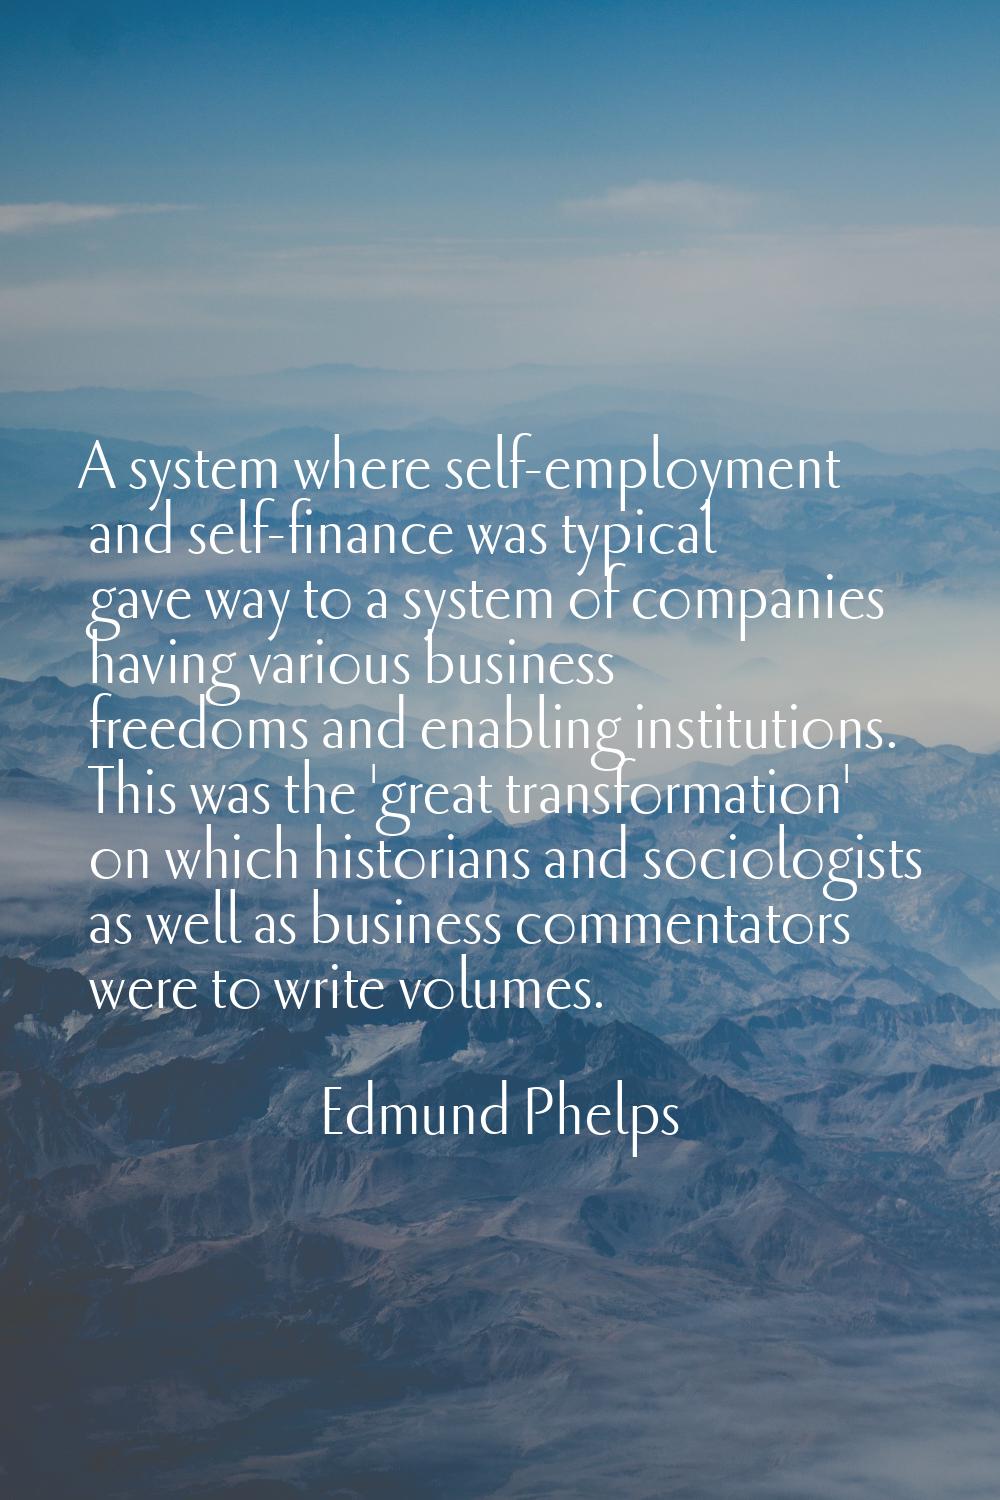 A system where self-employment and self-finance was typical gave way to a system of companies havin